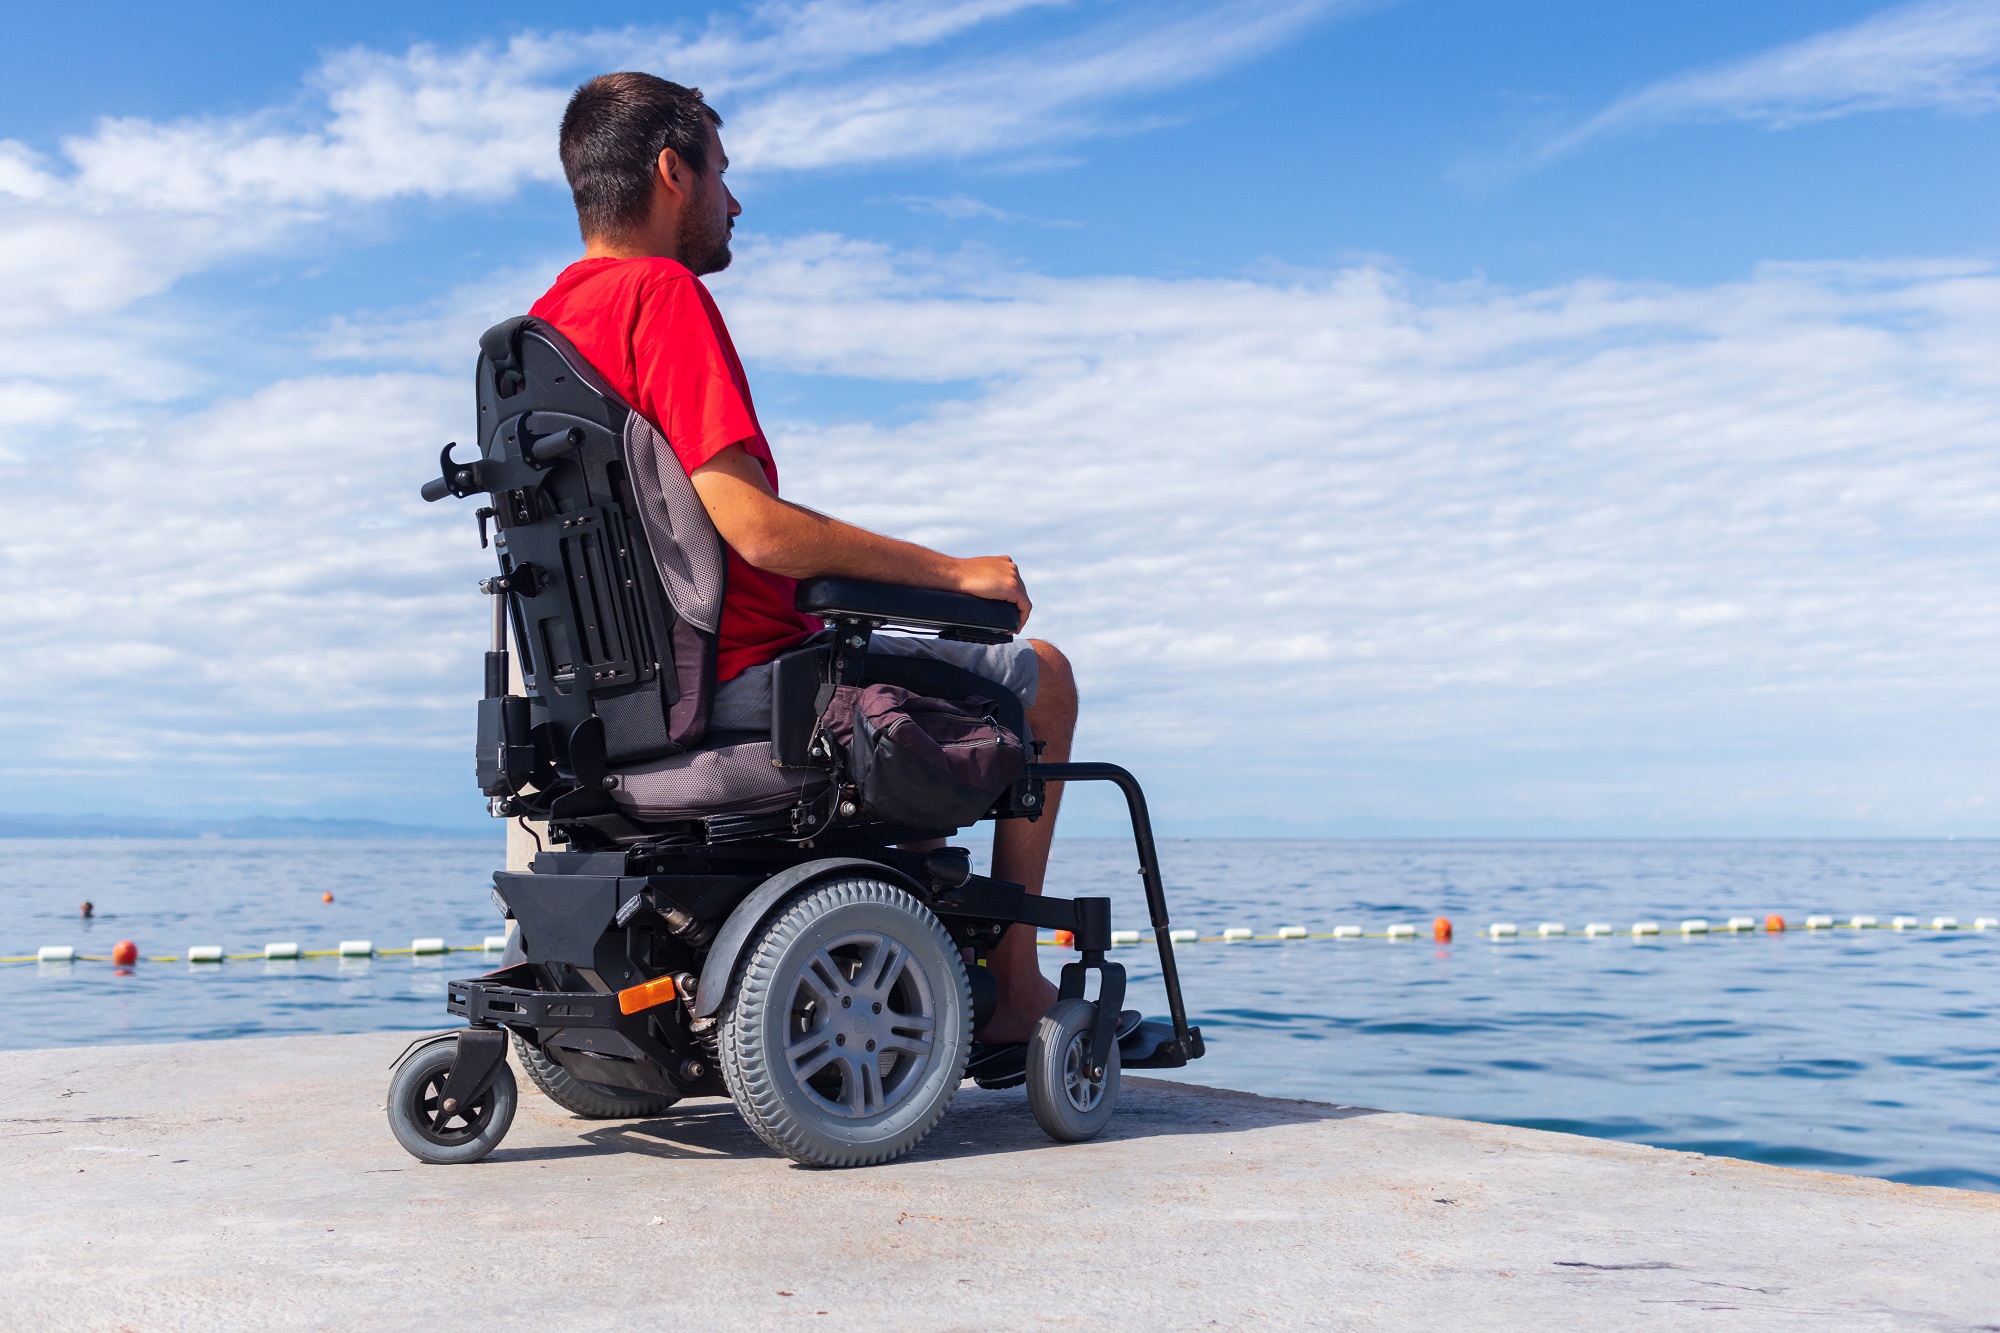 Man on wheelchair looking at ocean on summer vacation.